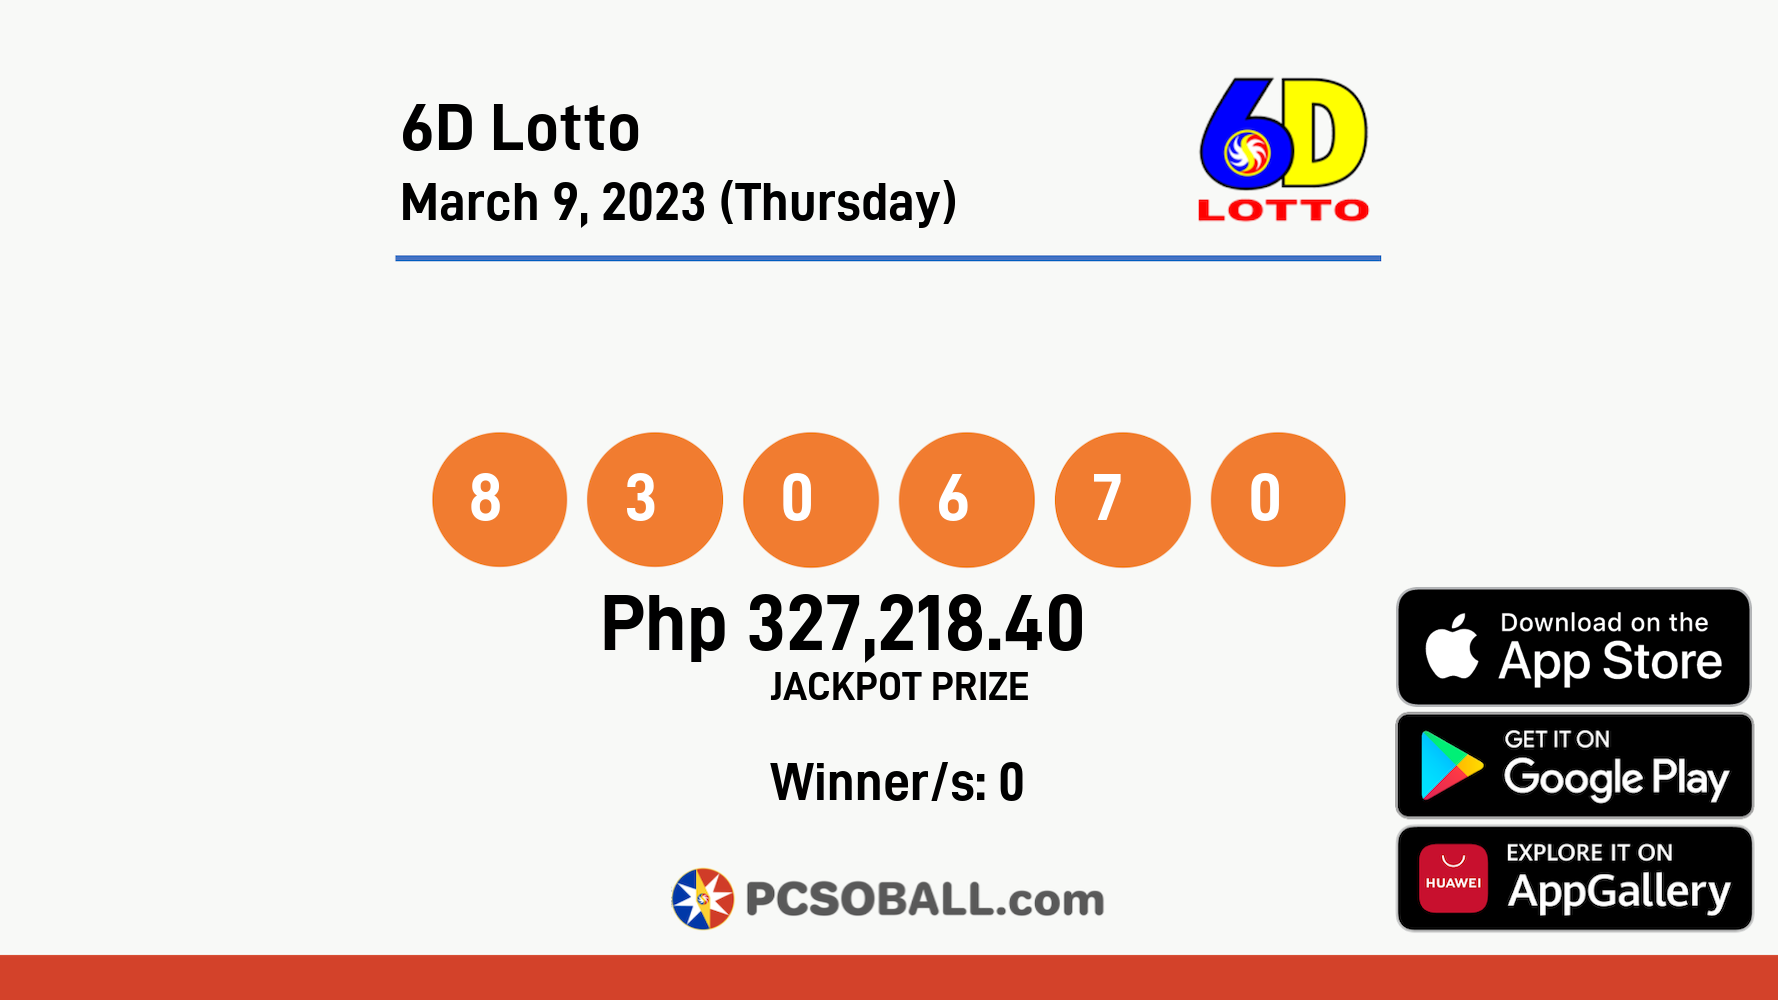 6D Lotto March 9, 2023 (Thursday) Result